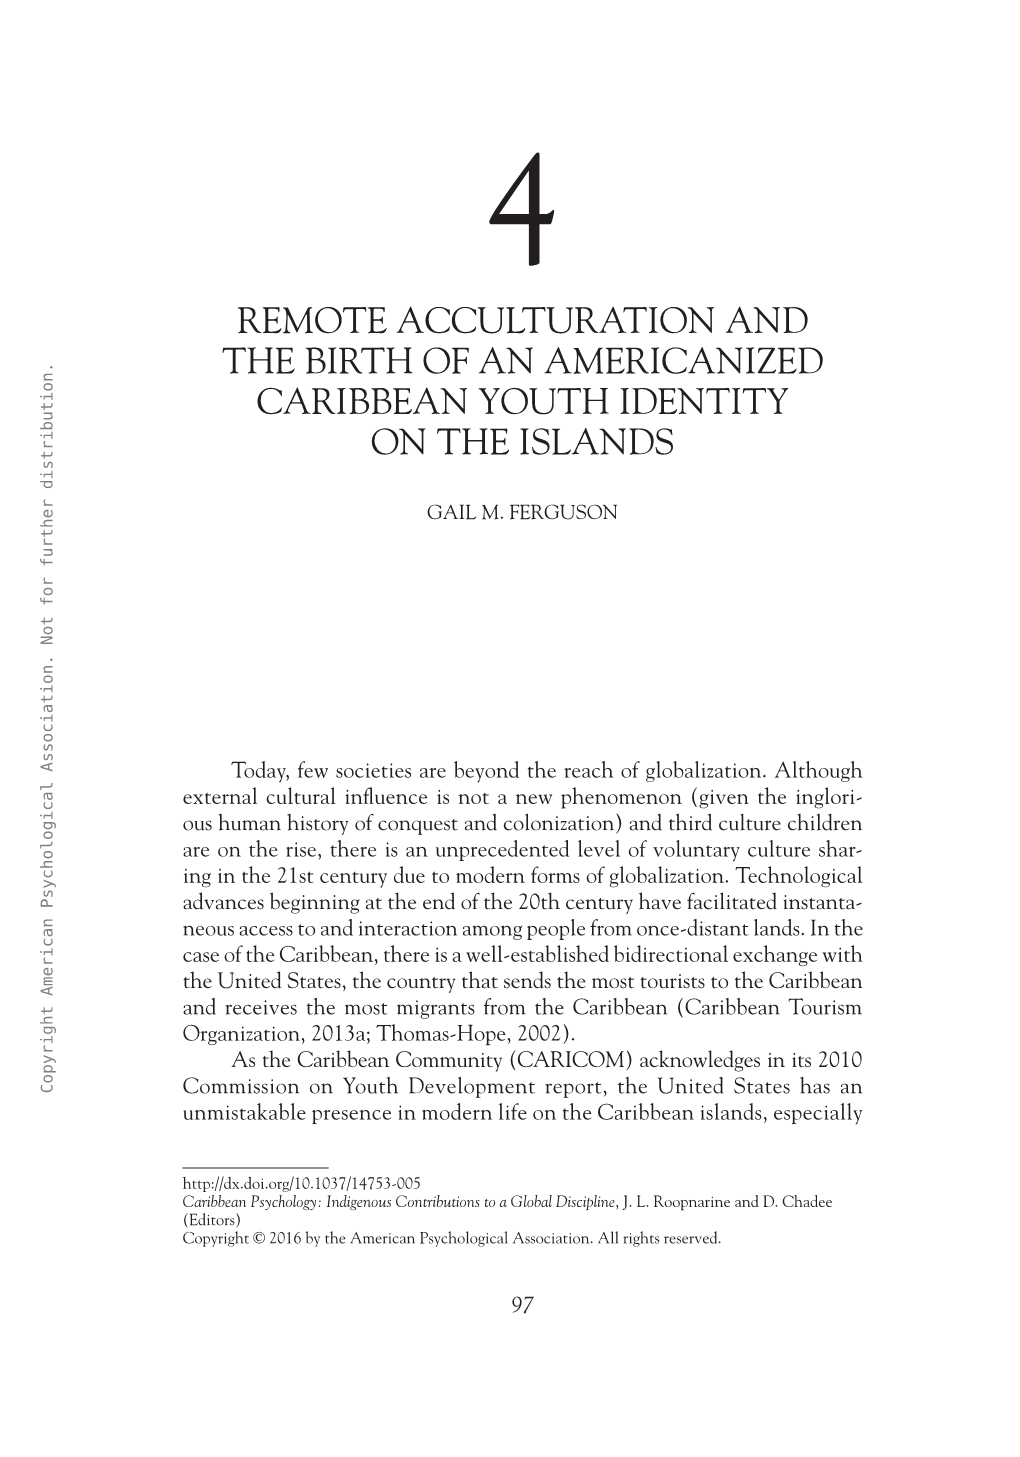 Caribbean Psychology: Indigenous Contributions to a Global Discipline, J